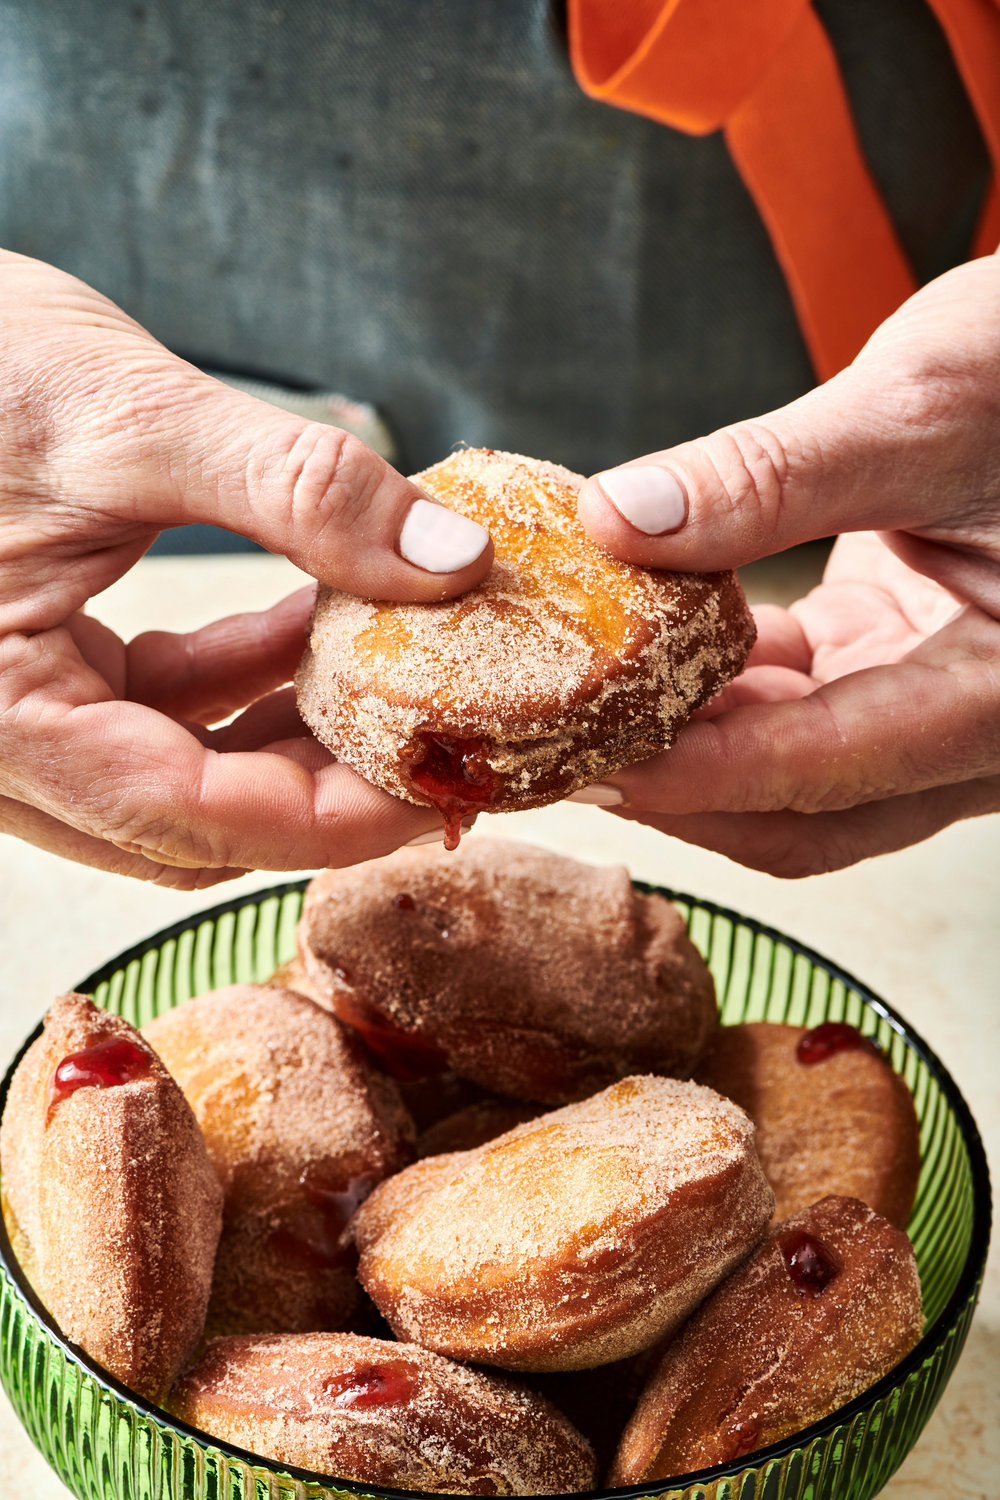 In Jewish homes, jelly doughnuts are often enjoyed during Hanukkah and are known as Sufganiyot.